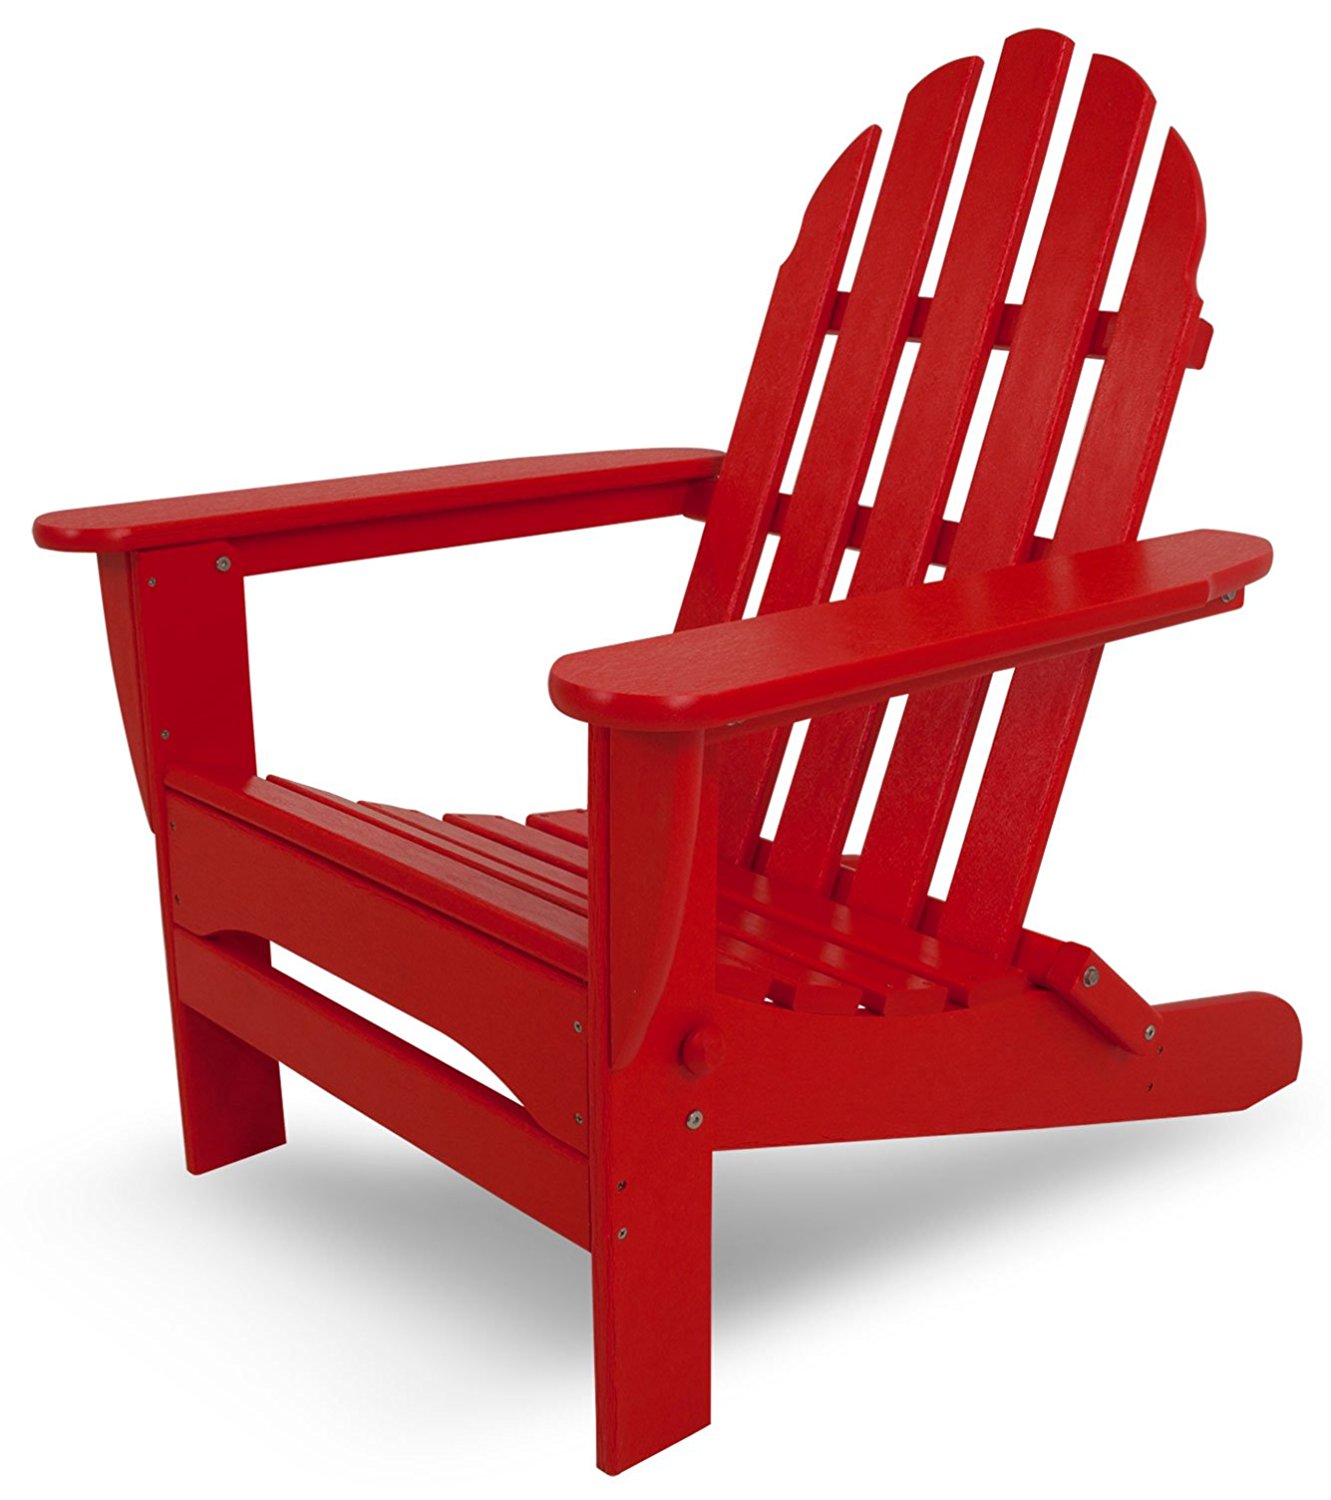 Polywood Adirondack Chair In Sunset Red 